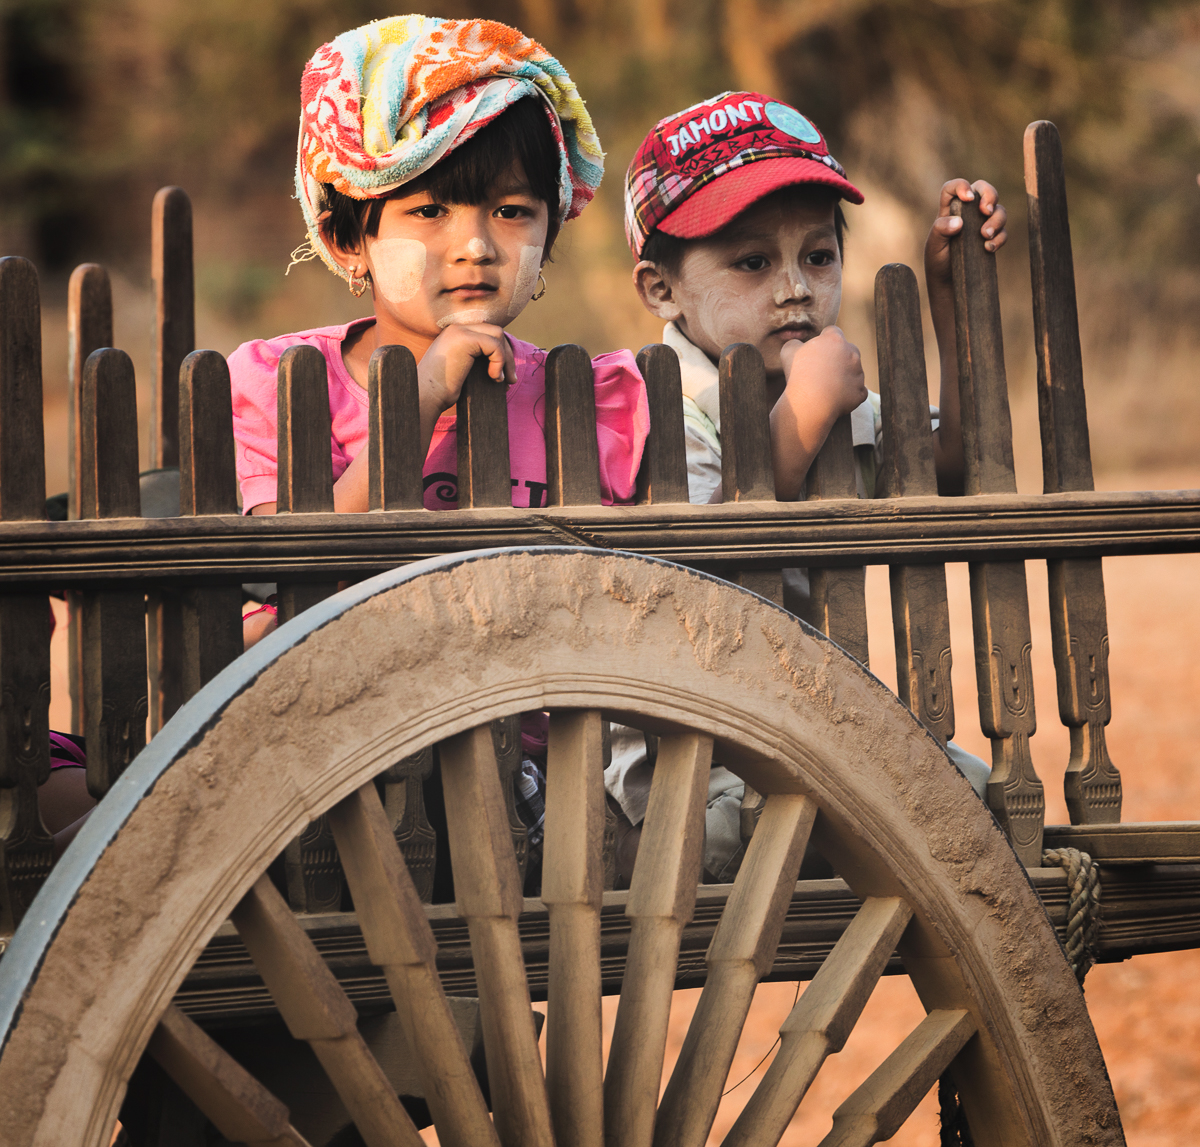 Local siblings riding in oxcarts